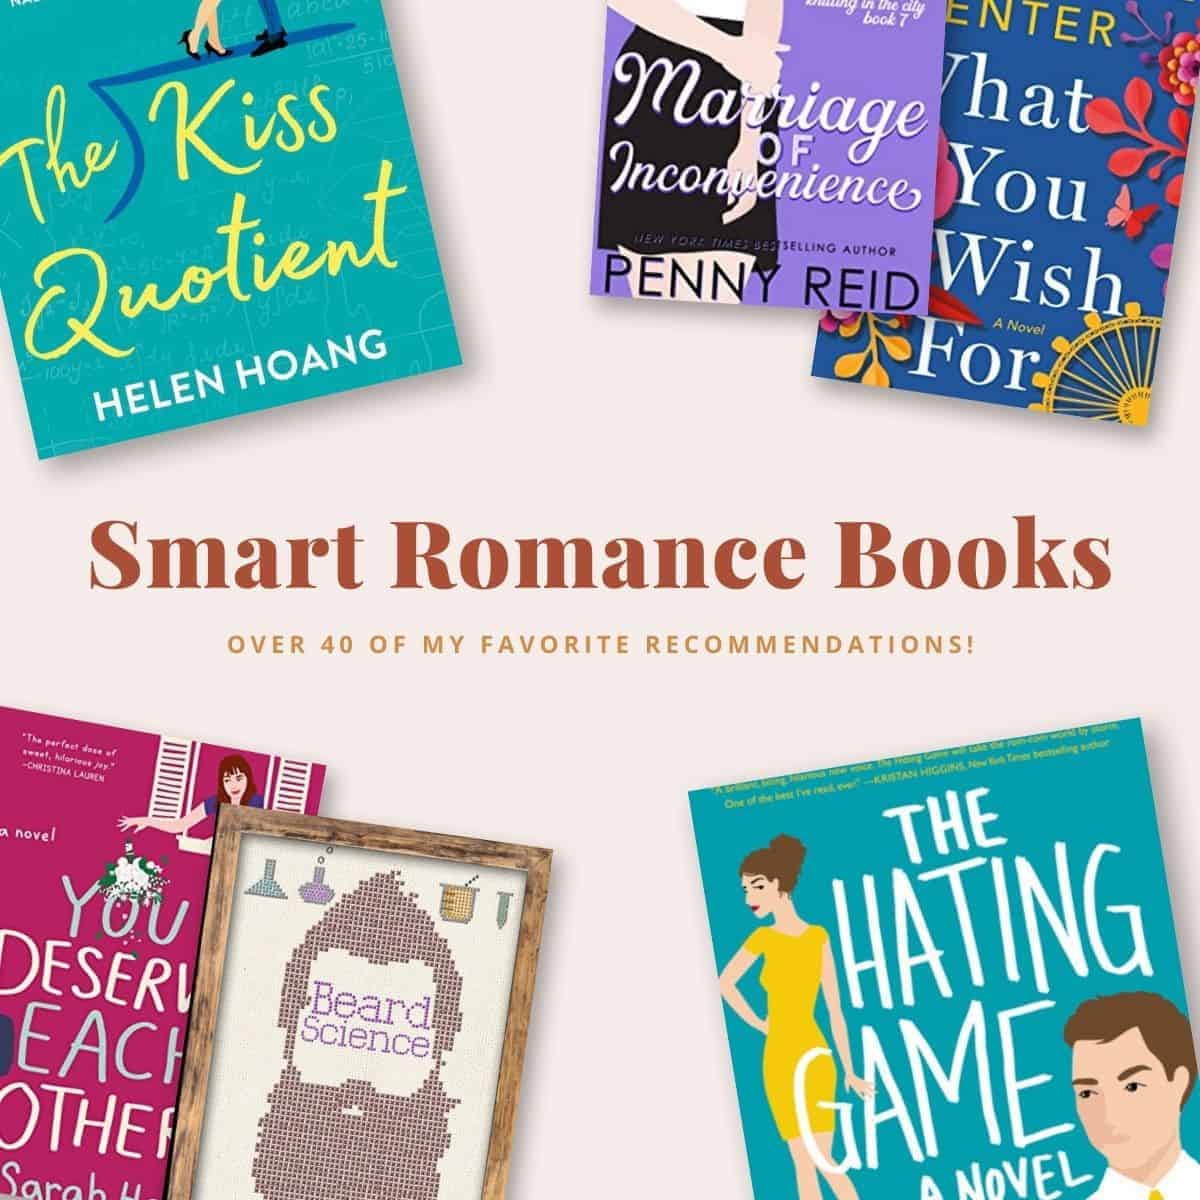 The Best Smart Romance Novels is a curated list of smart romance book recommendations by book blogger Totally Bex